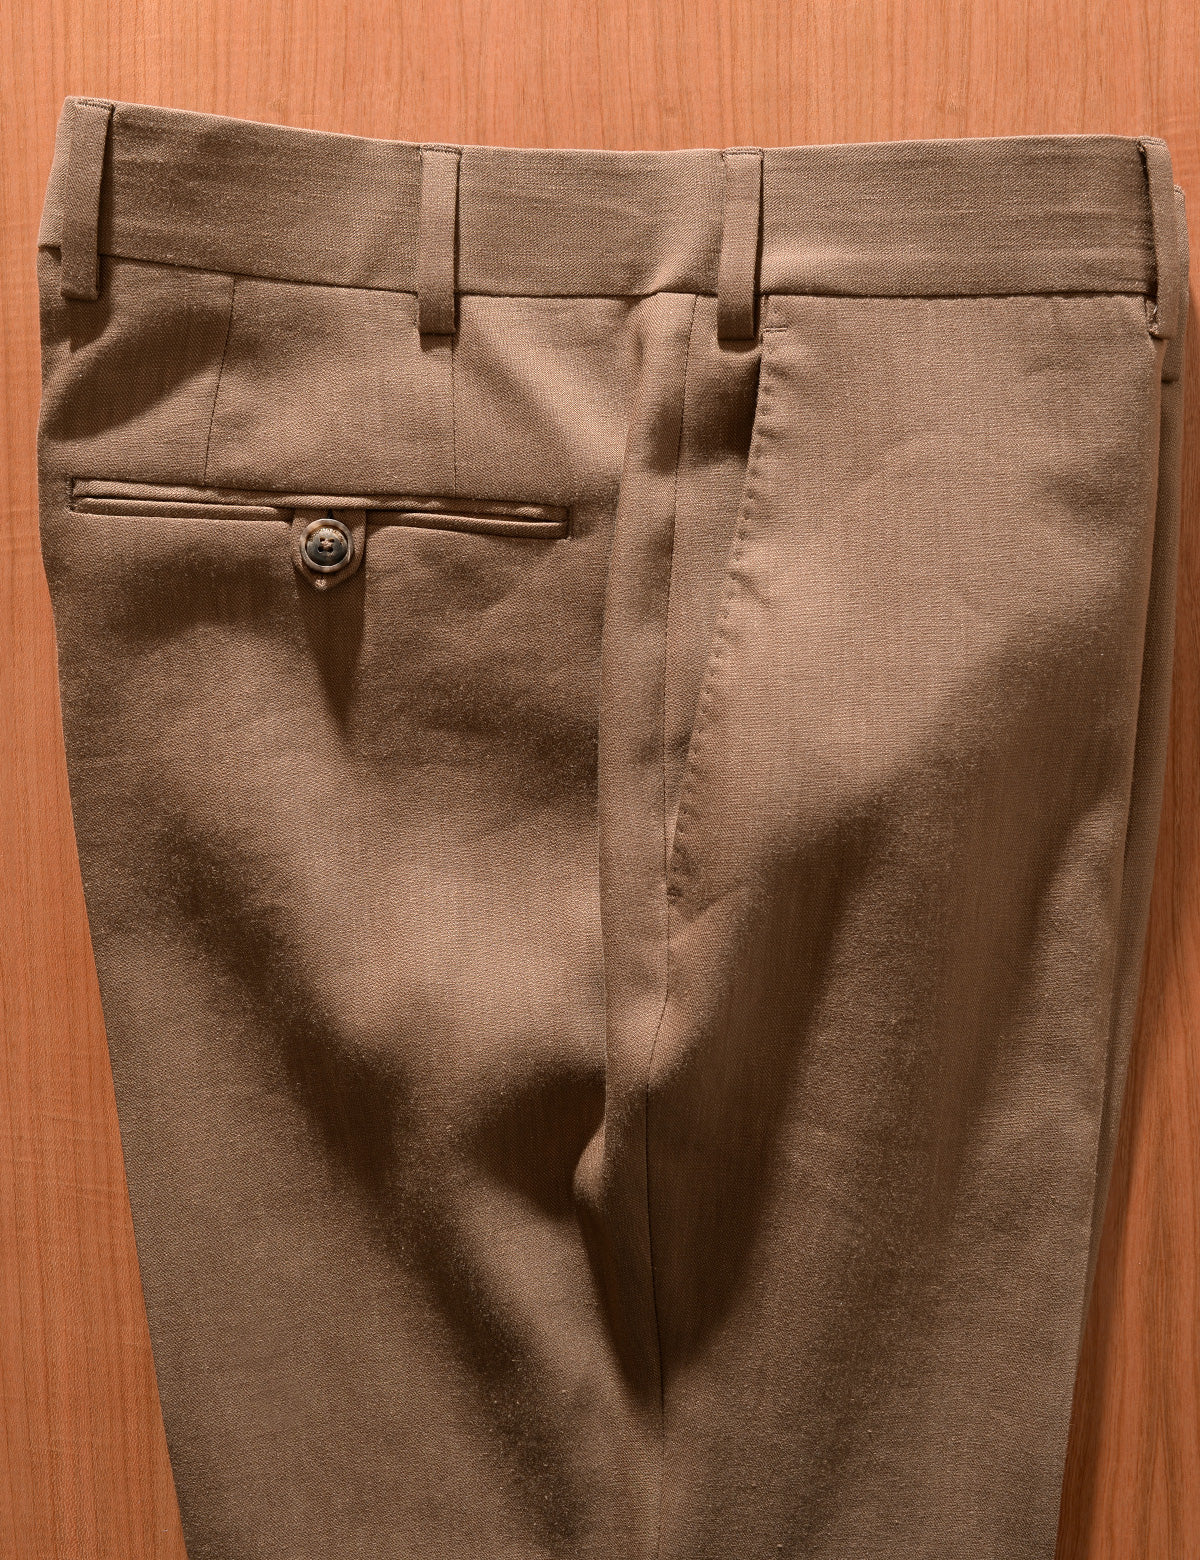 Detail of BKT50 Tailored Trousers in Wool Linen - Sahara showing back pocket, waist, fabric texture